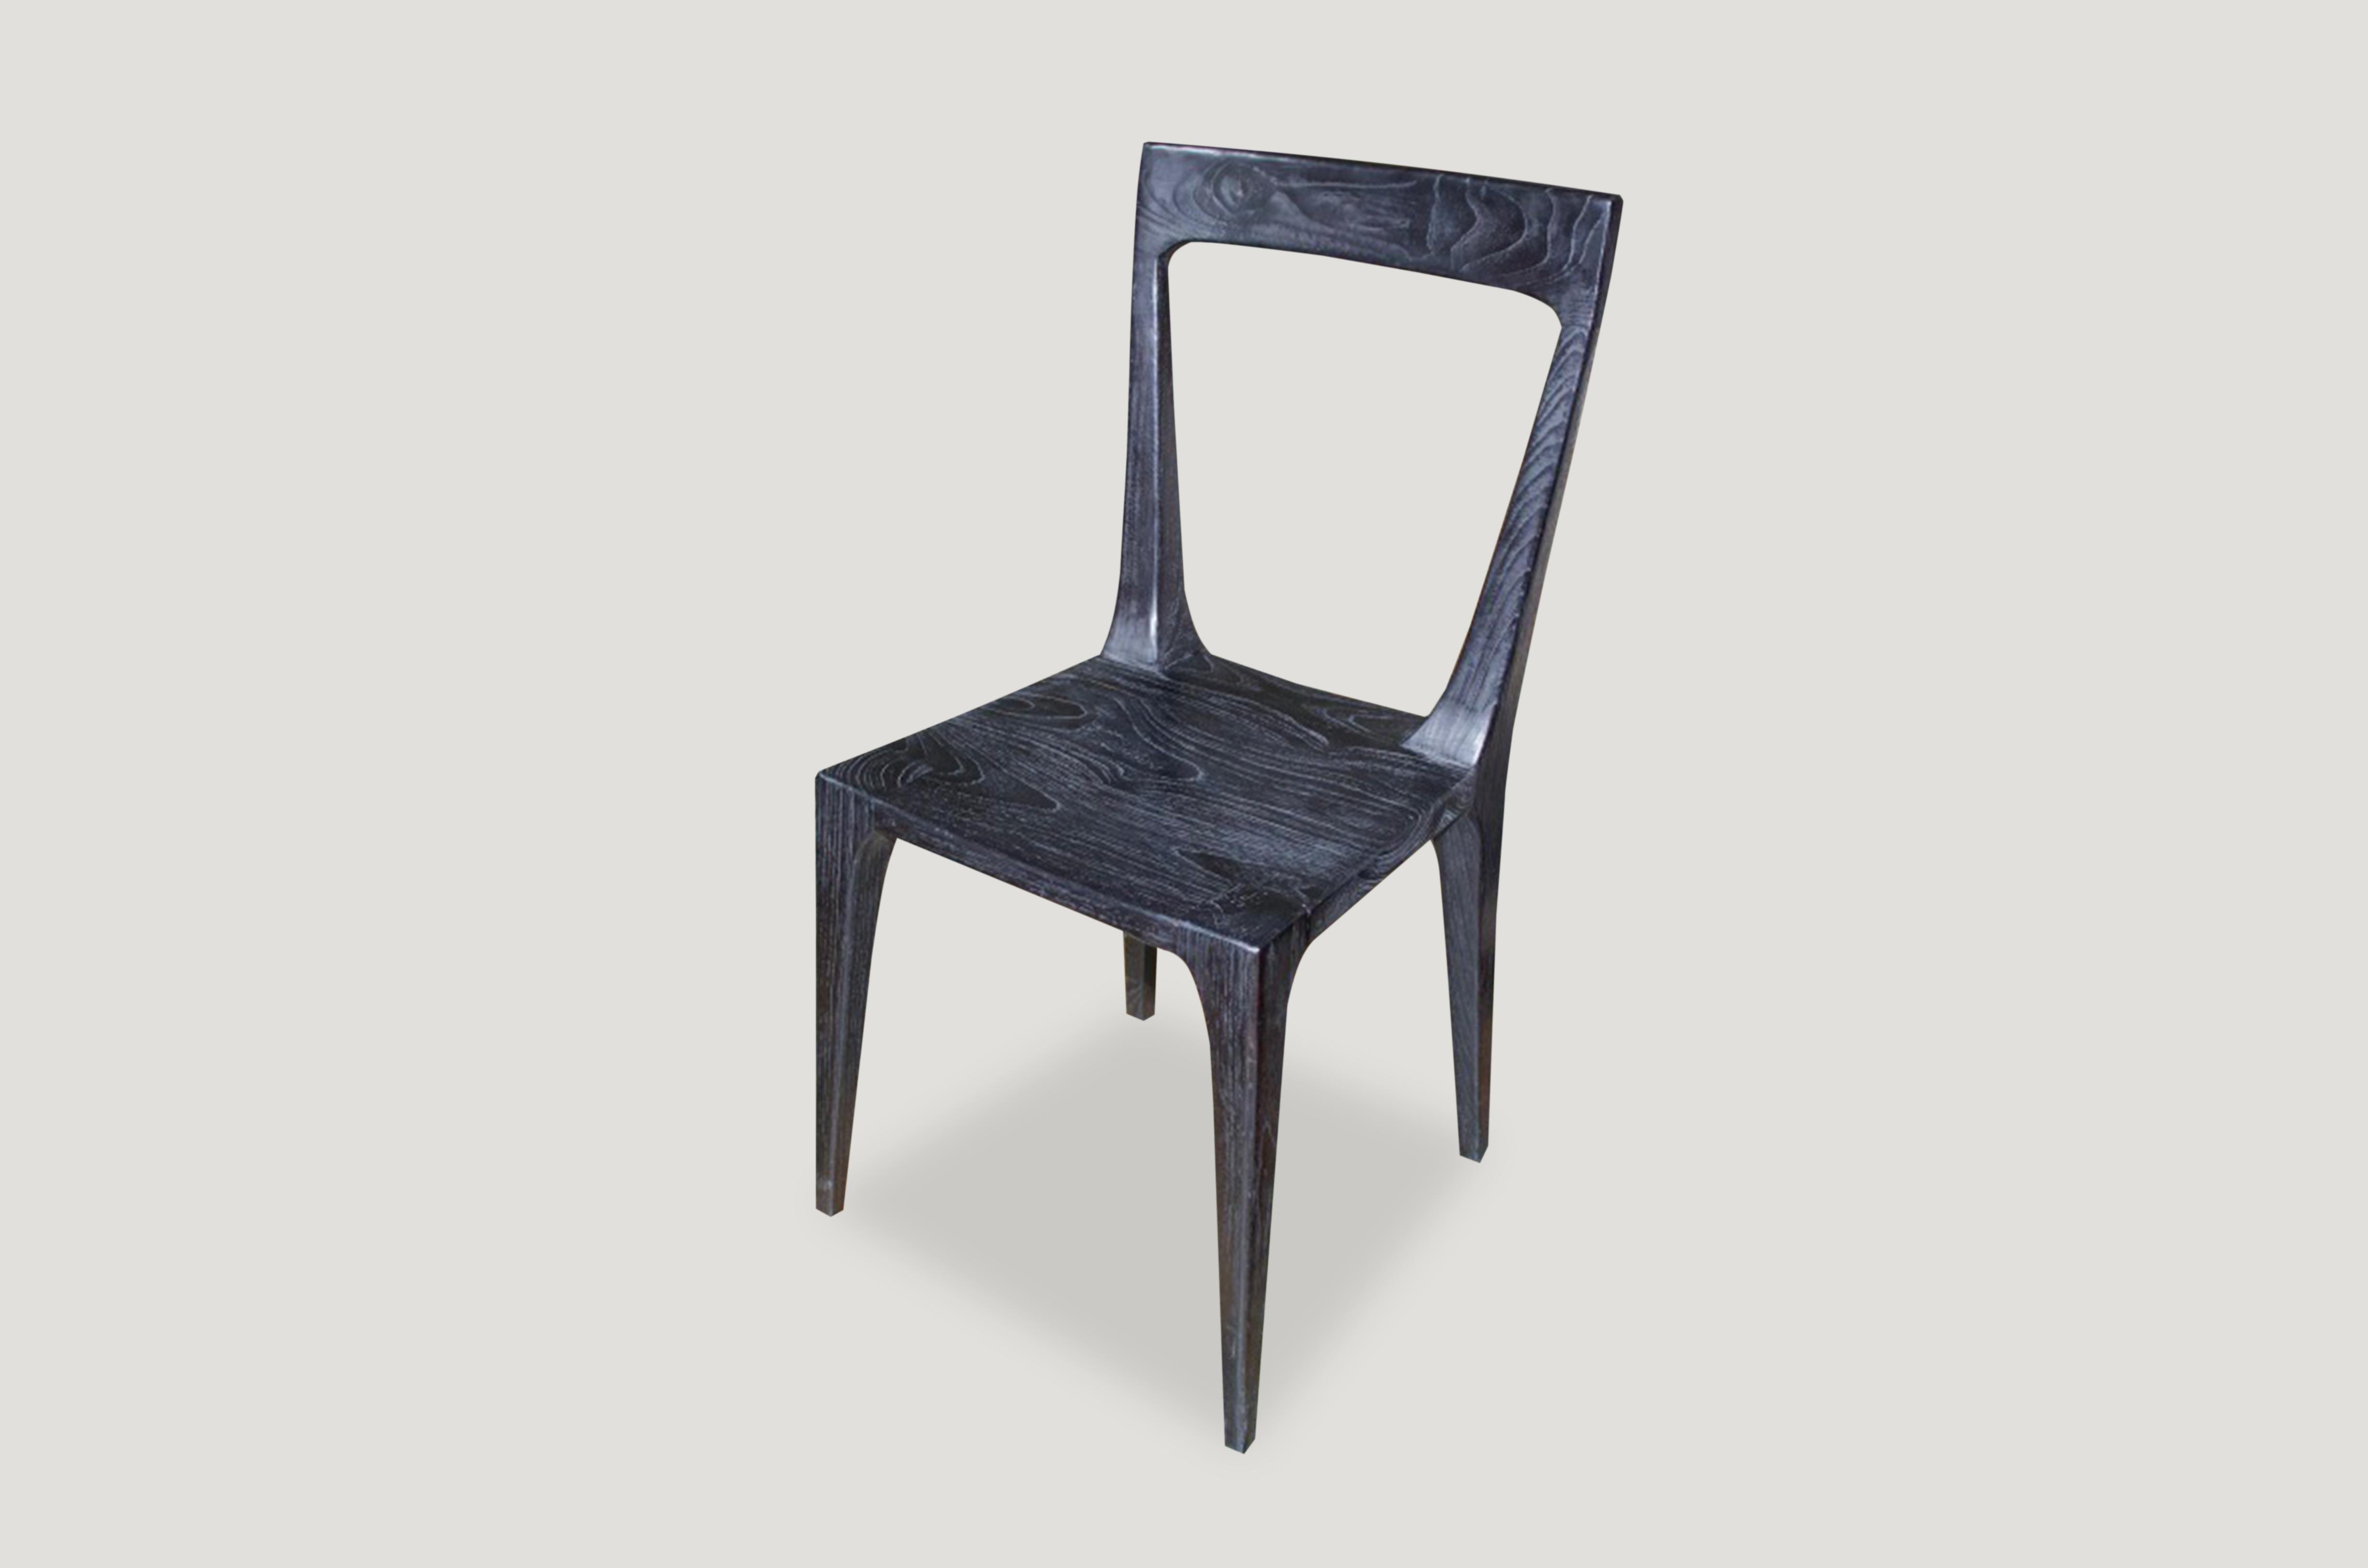 Minimalist chair hand carved from reclaimed teak wood. Burnt, sanded and sealed with a smooth finish. 15-17